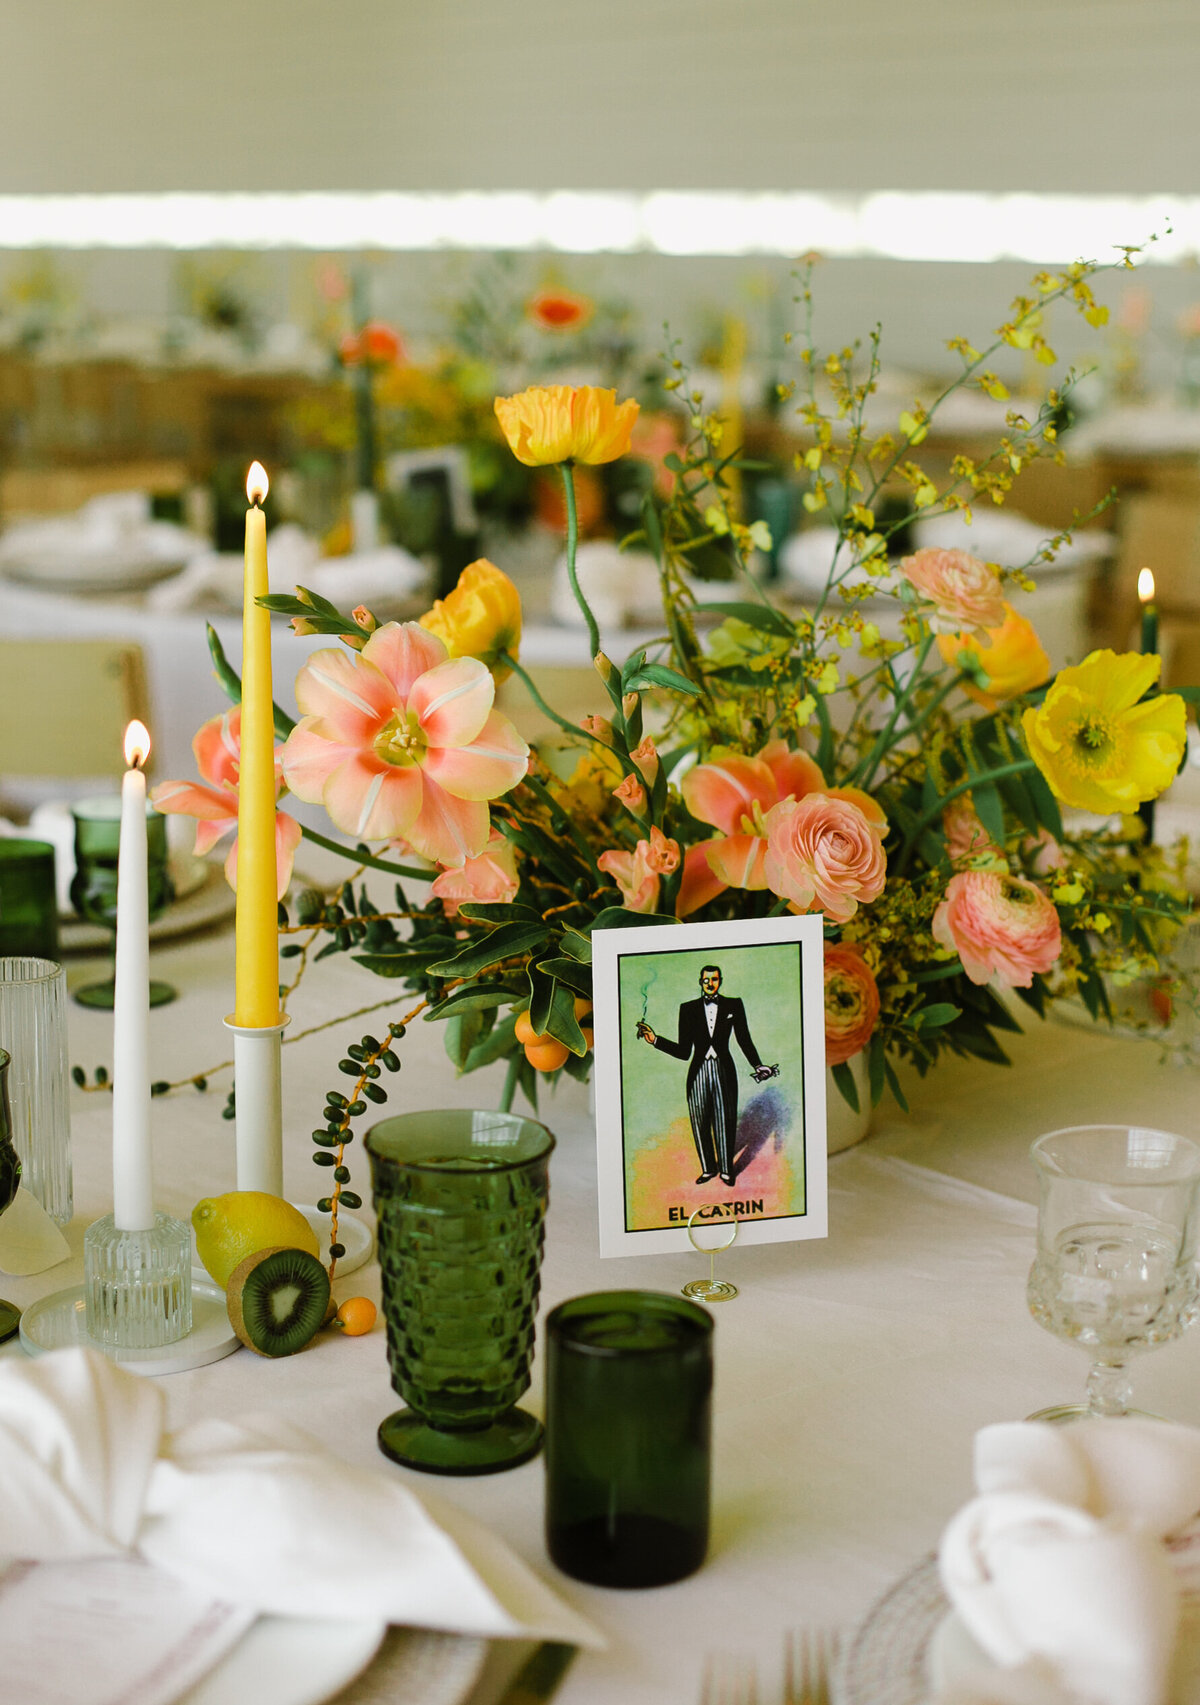 Wedding reception table decorated with peach and yellow florals, green glasses and yellow candles